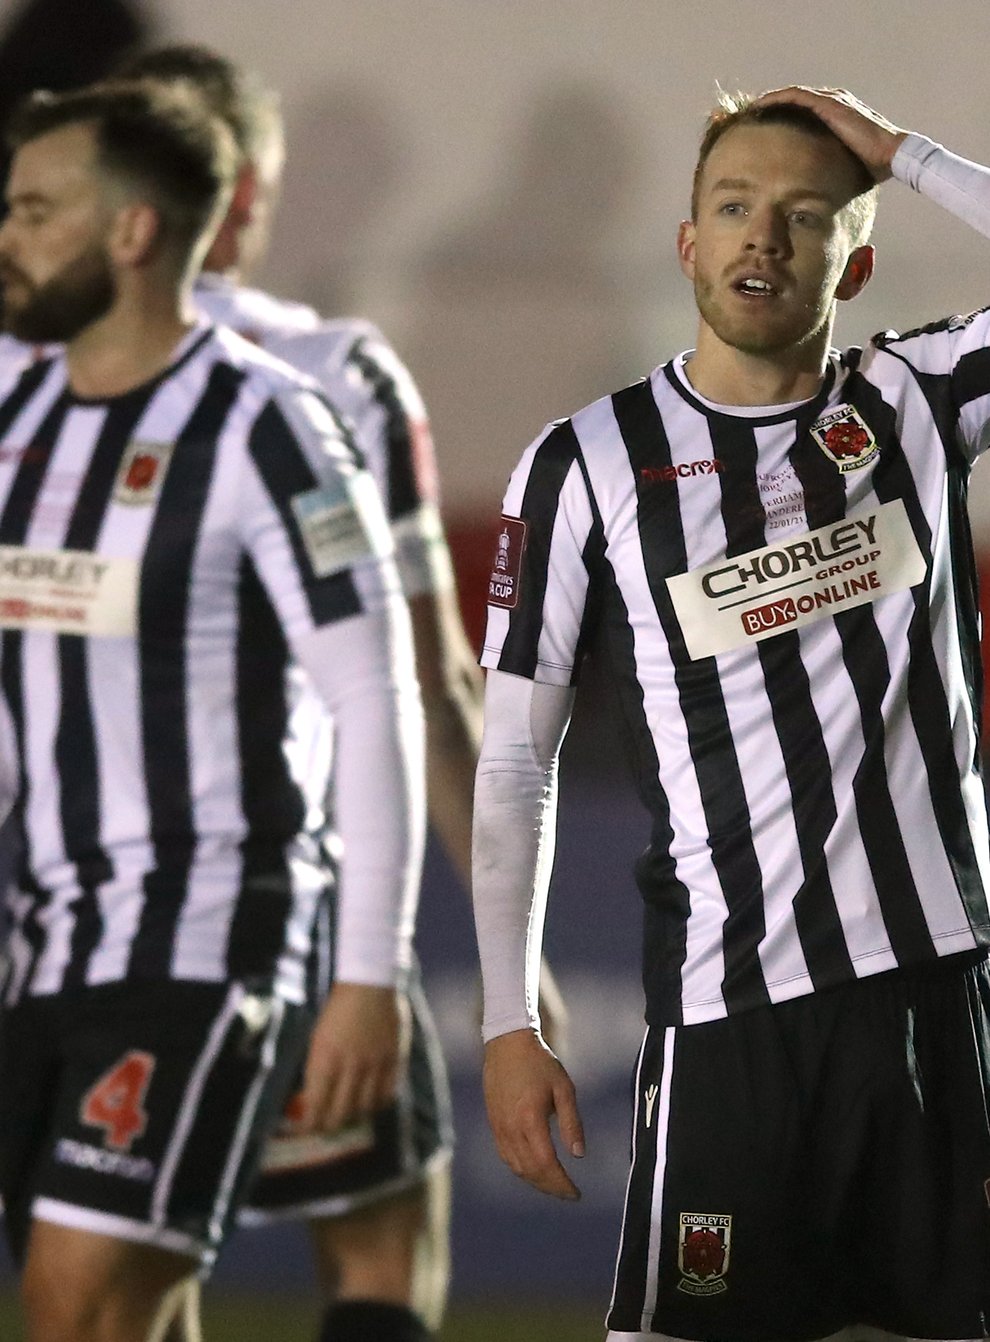 Chorley's brilliant FA Cup run ended in a battling defeat to Wolves